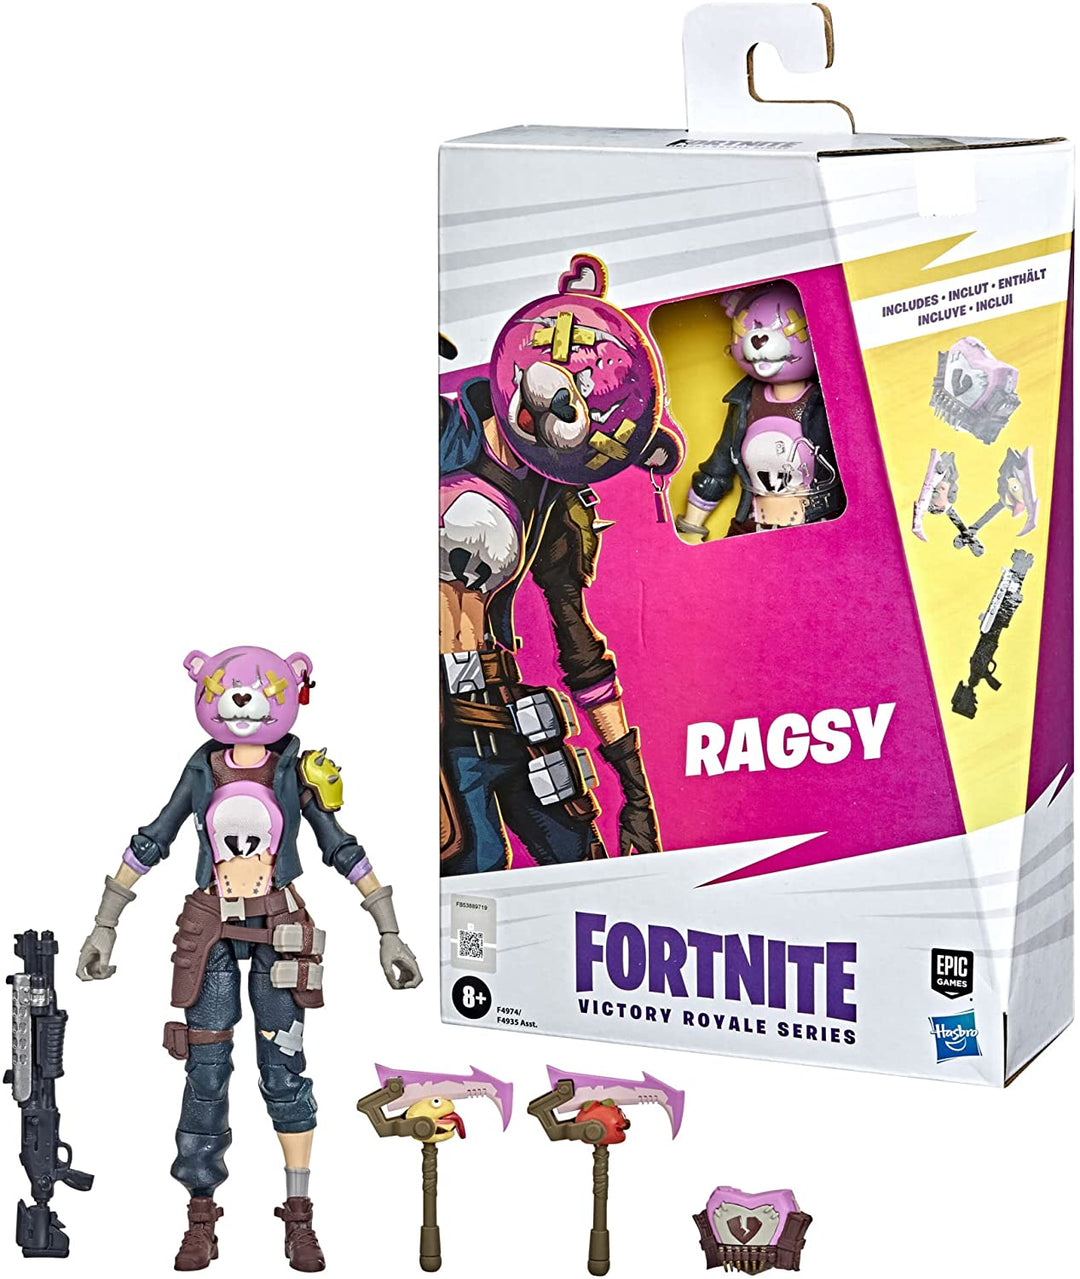 Hasbro Fortnite Victory Royale Series Ragsy Collectible Action Figure with Acces